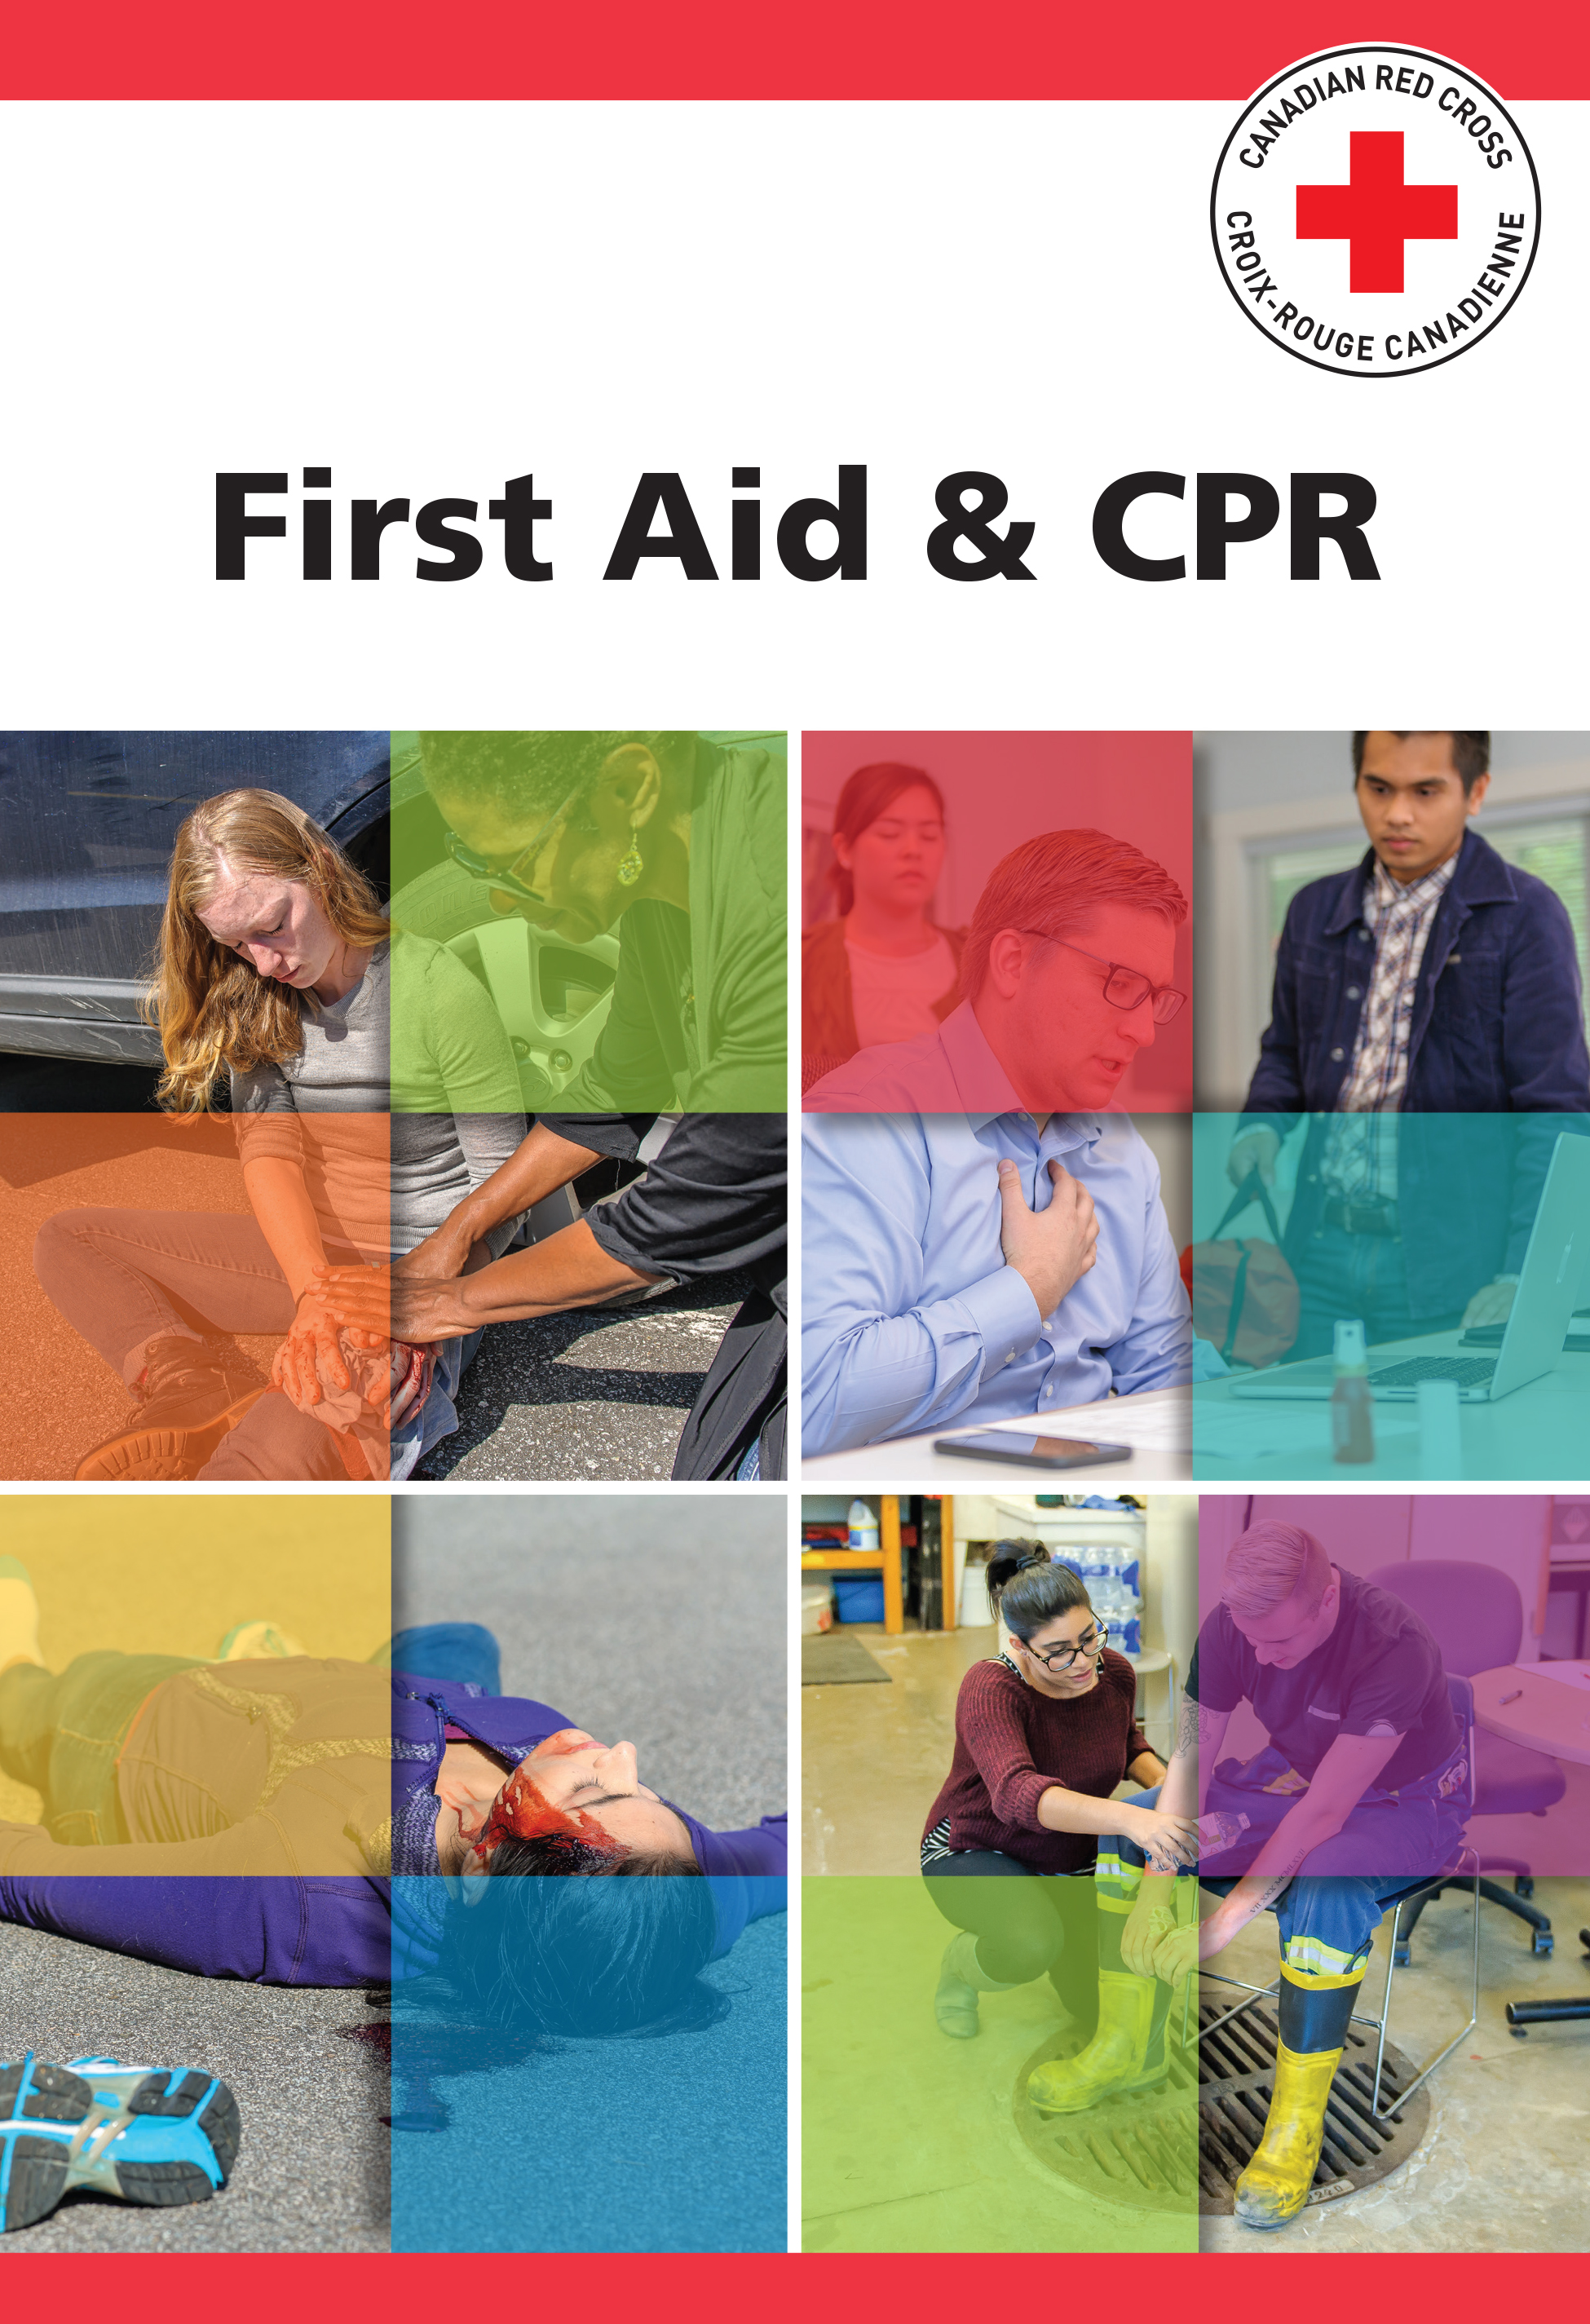 First Aid Course Materials for Marine Basic First Aid and CPR Level C (Blended) in Nanaimo